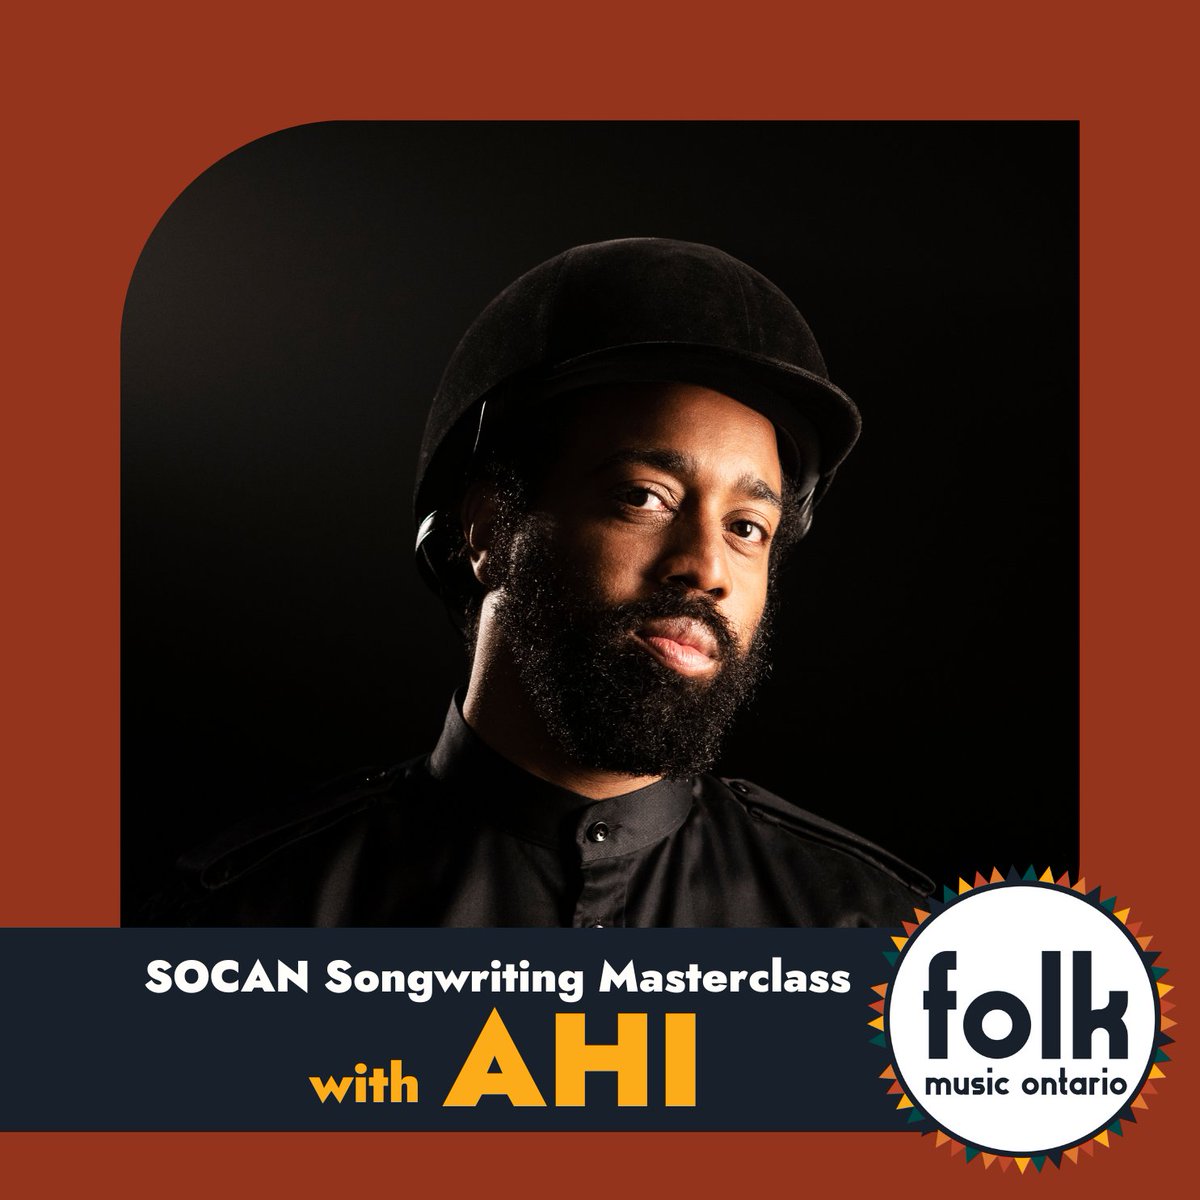 That’s right! This year’s SOCAN Songwriting Masterclass is with the incredible AHI! @SOCANmusic @SOCANFoundation @AHImusic #folkmusic #folkconference #folkcanada